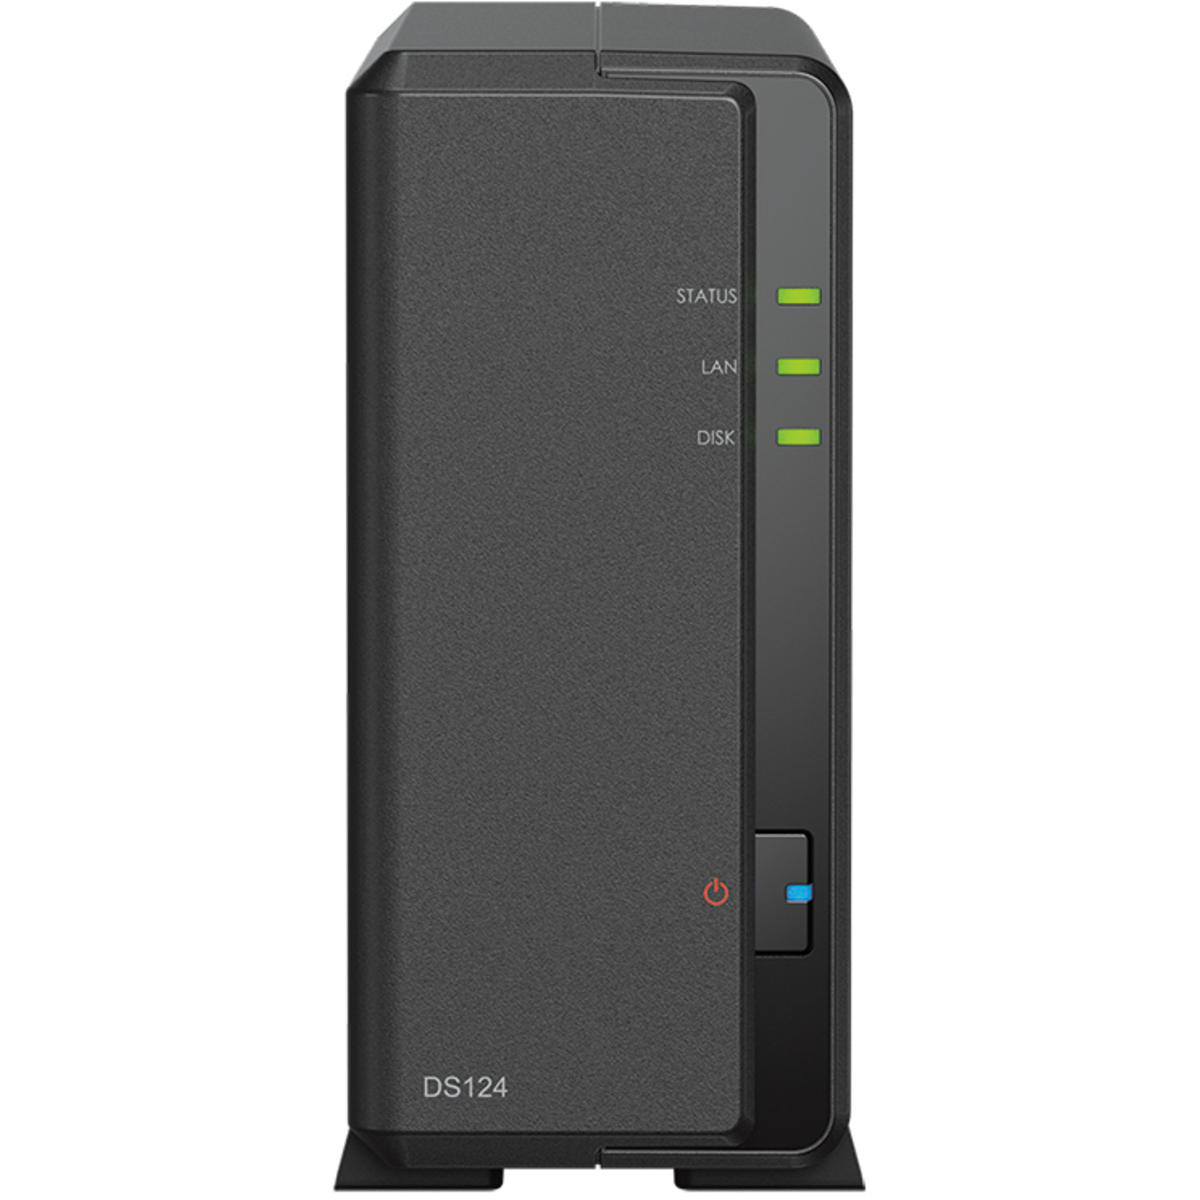 buy Synology DiskStation DS124 6tb Desktop NAS - Network Attached Storage Device 1x6000gb Western Digital Red WD60EFAX 3.5 5400rpm SATA 6Gb/s HDD NAS Class Drives Installed - Burn-In Tested - ON SALE - nas headquarters buy network attached storage server device das new raid-5 free shipping simply usa DiskStation DS124